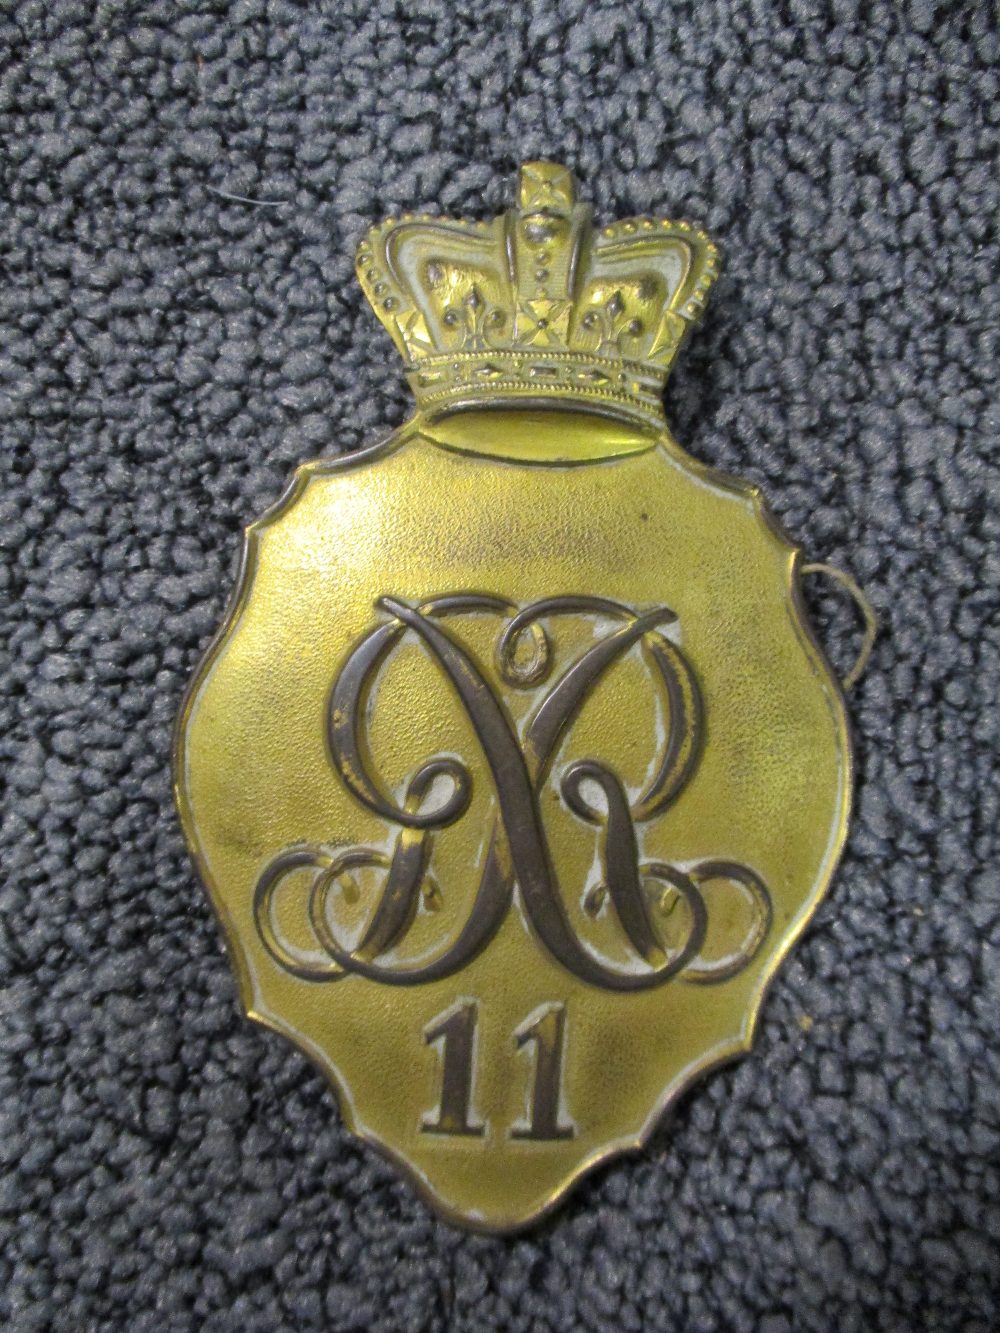 A George III copper-gilt shako plate, with crown over royal cypher and No. 11 for the North